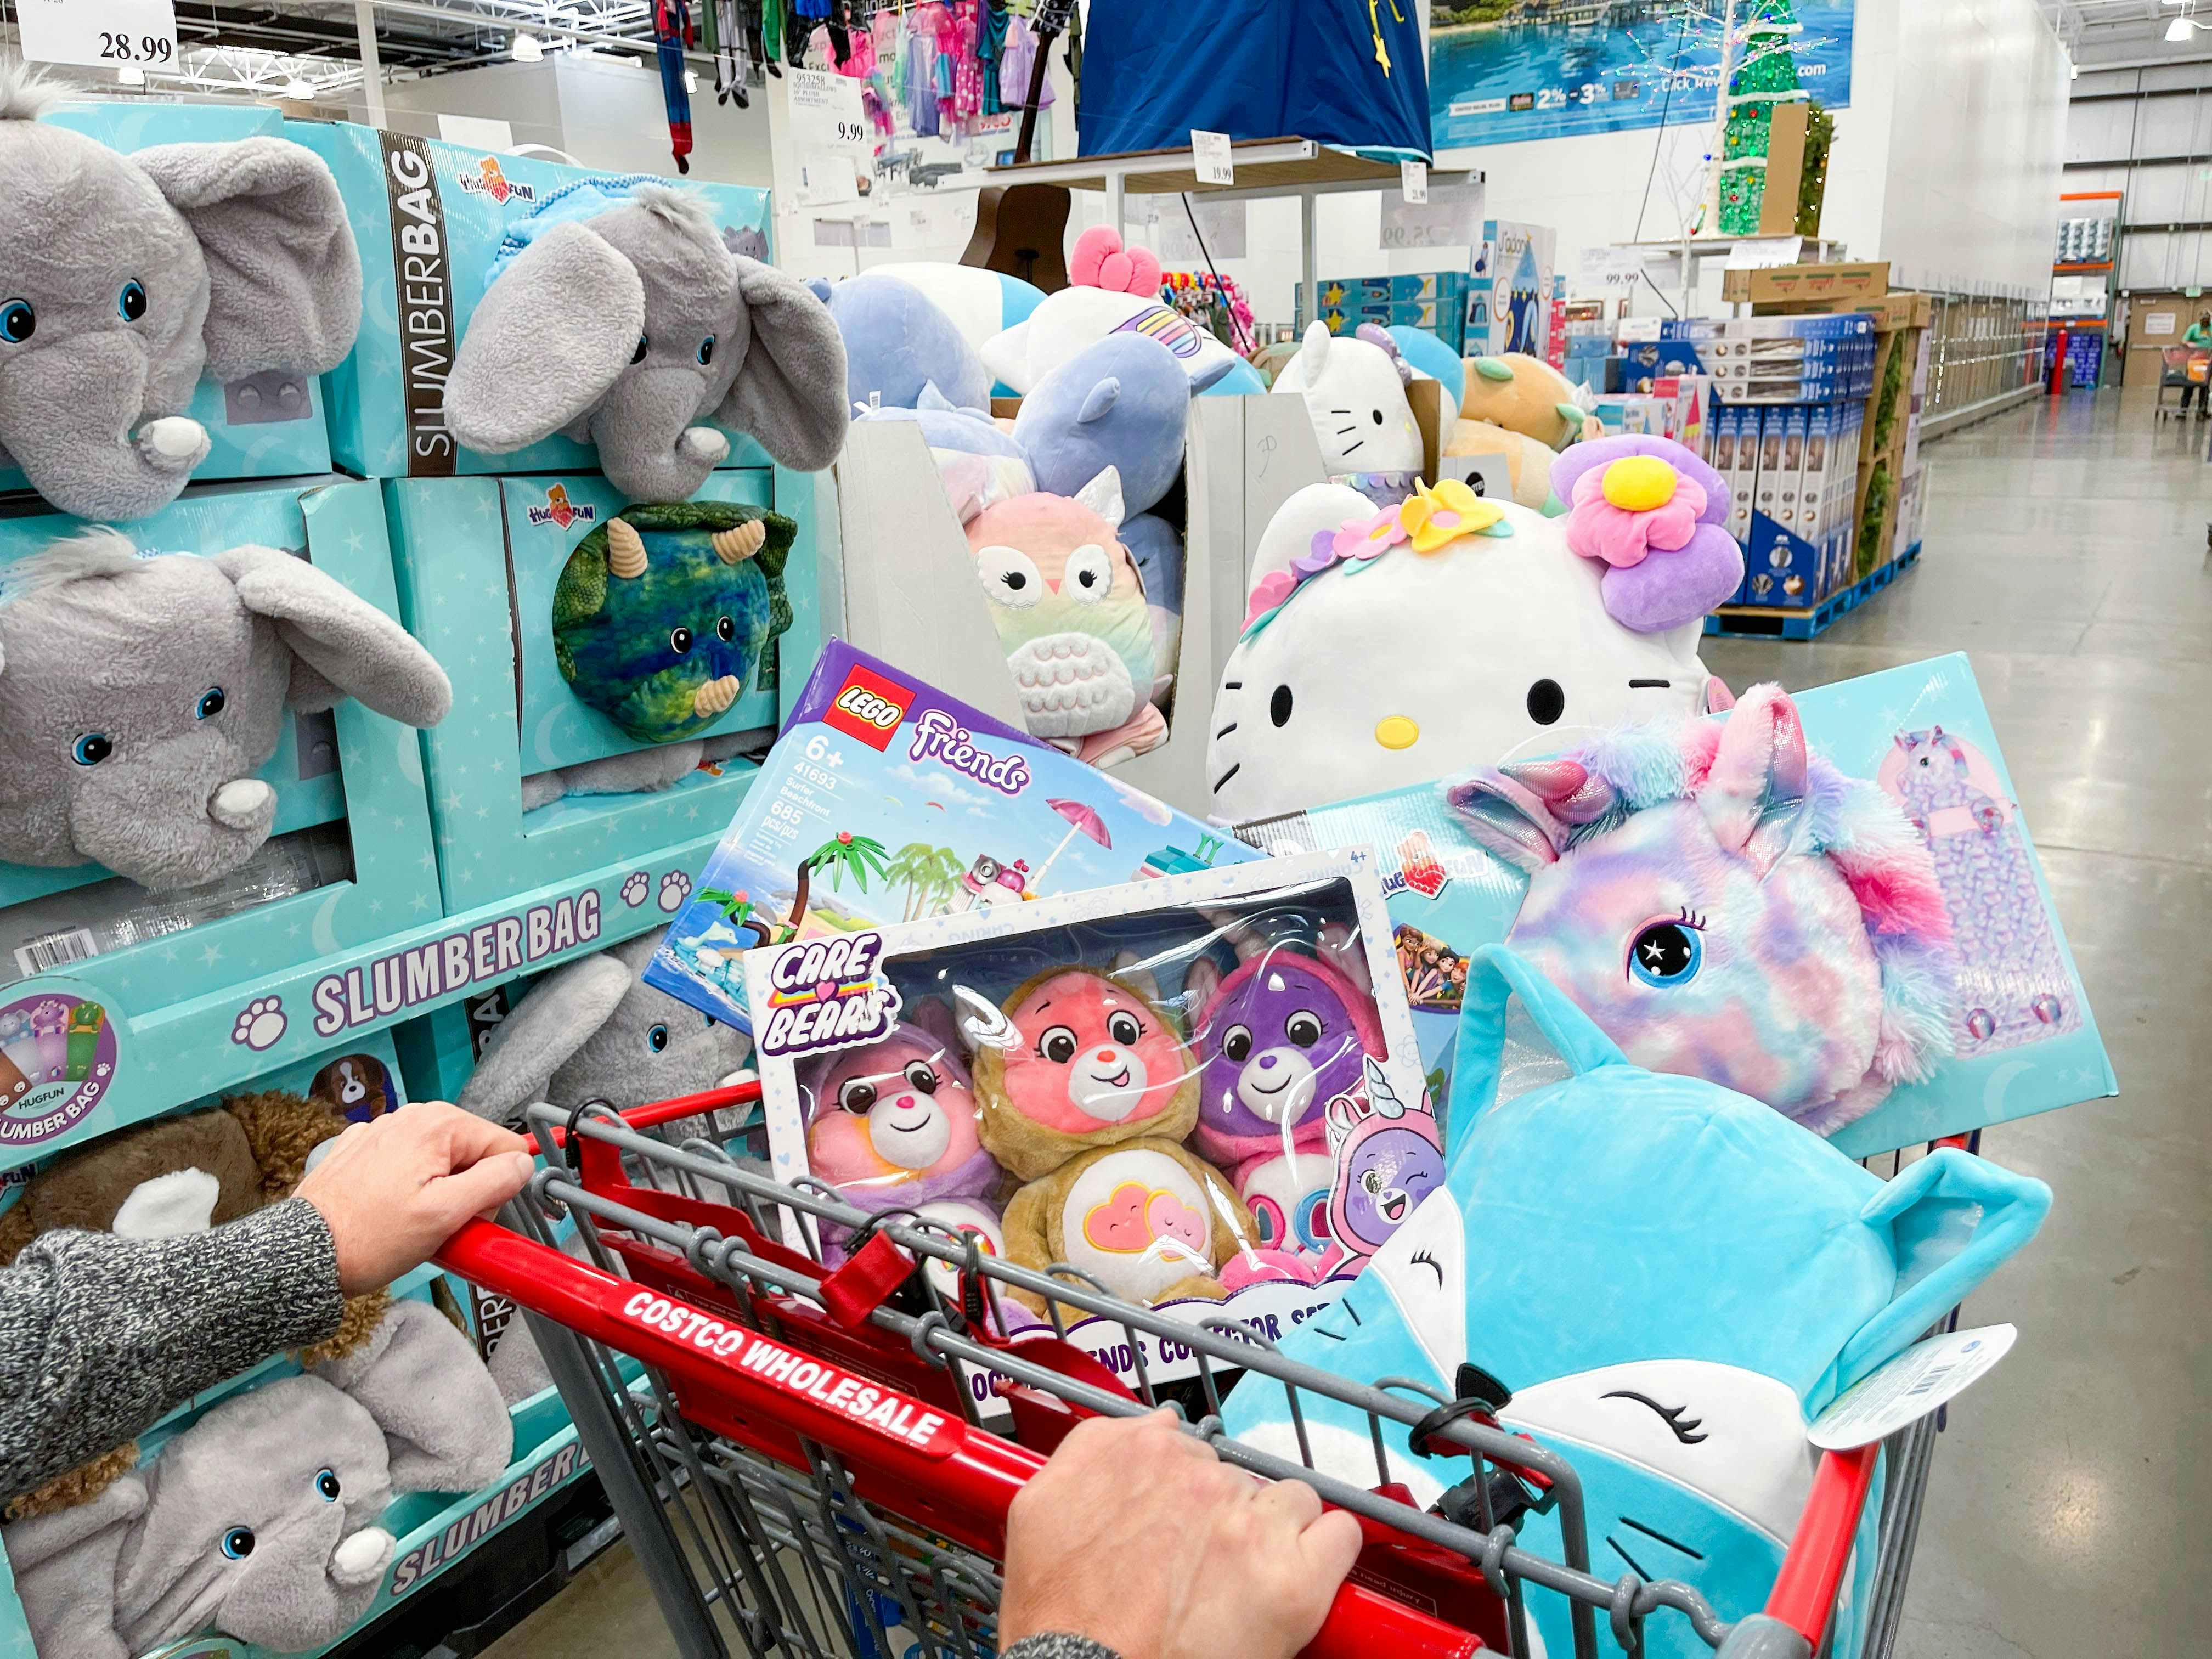 A person pushing a Costco shopping cart with the basket filled with plush toys in the toy aisle at Costco.